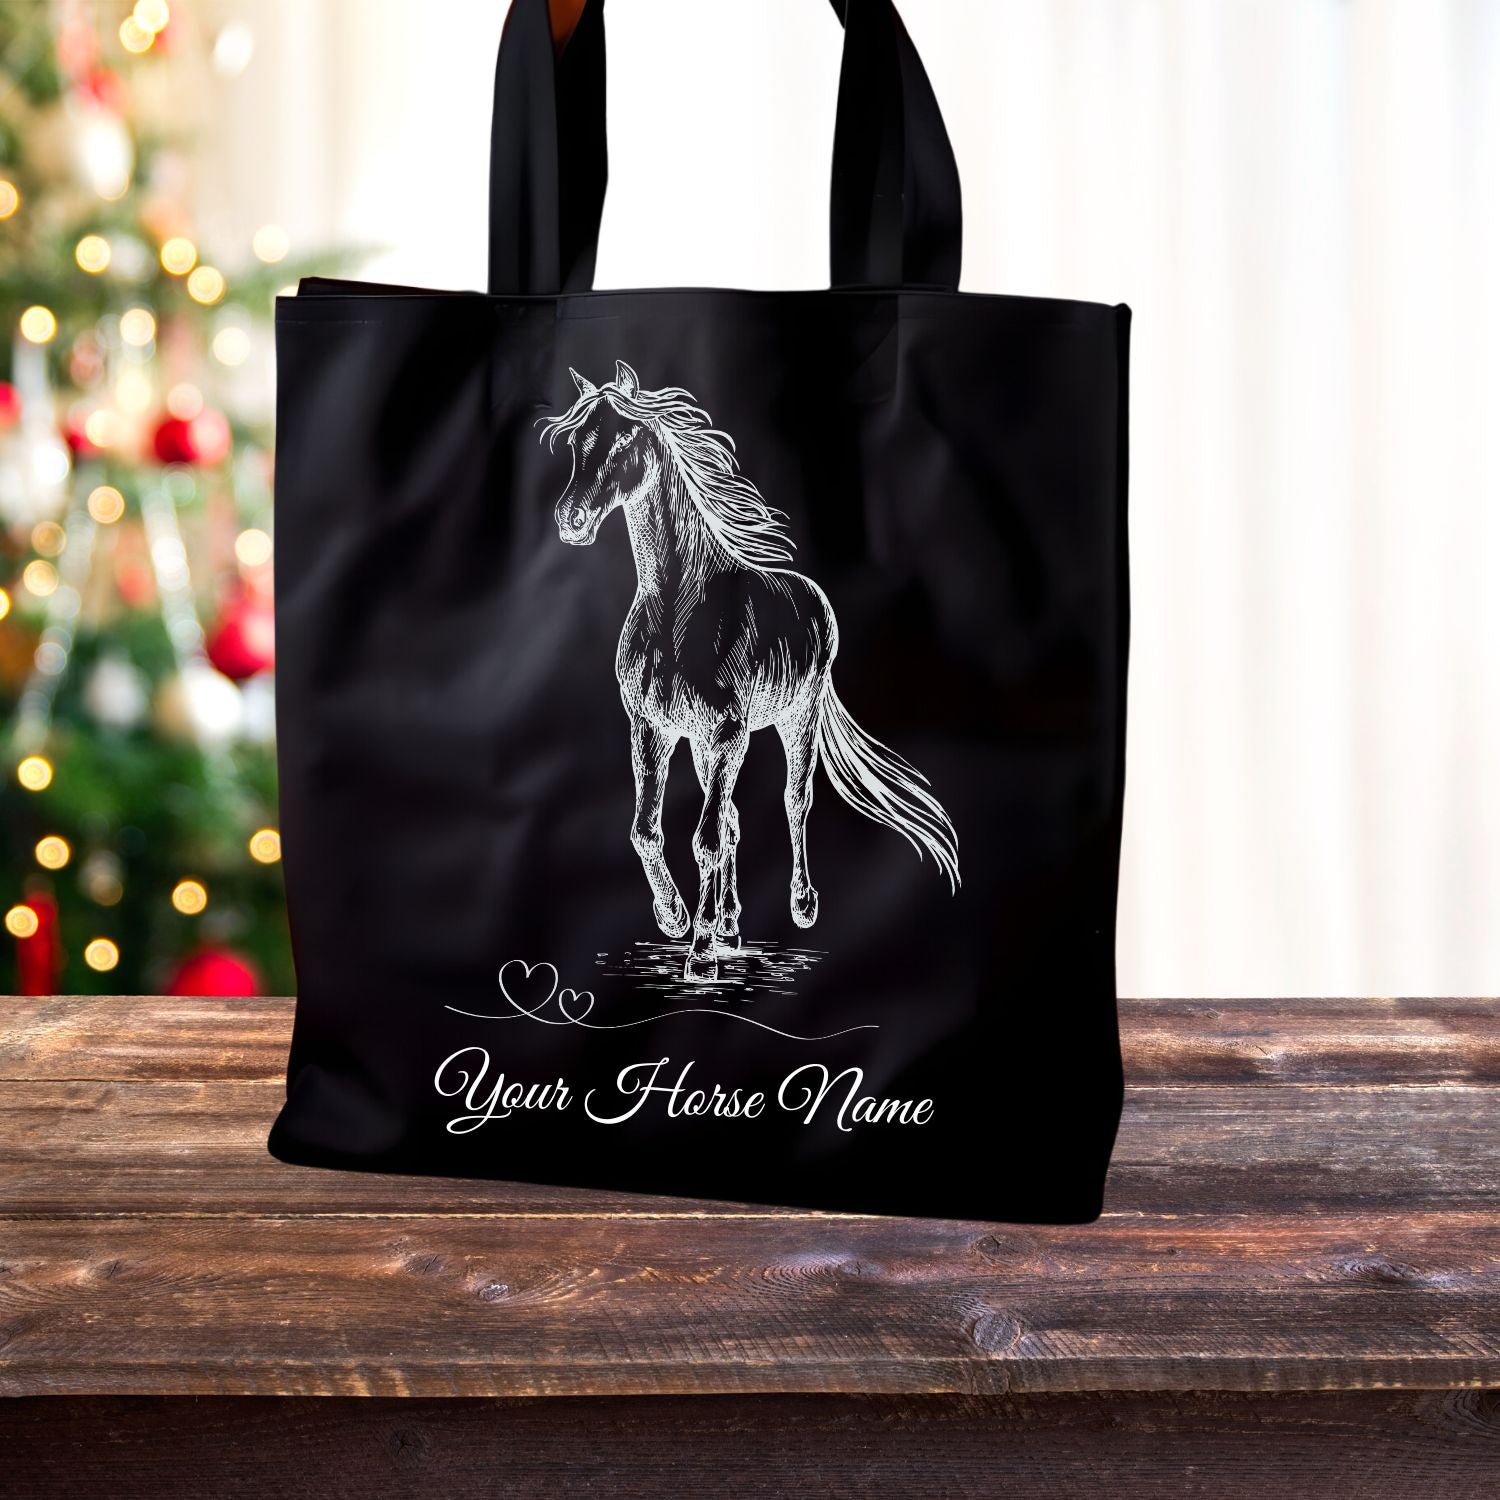 Personalized Horse Tote Bag - A Unique Gift for Horse Lovers - Carry the Spirit of the Season with a Customized Tote Featuring Your Favorite Equine Companion! Accessories   